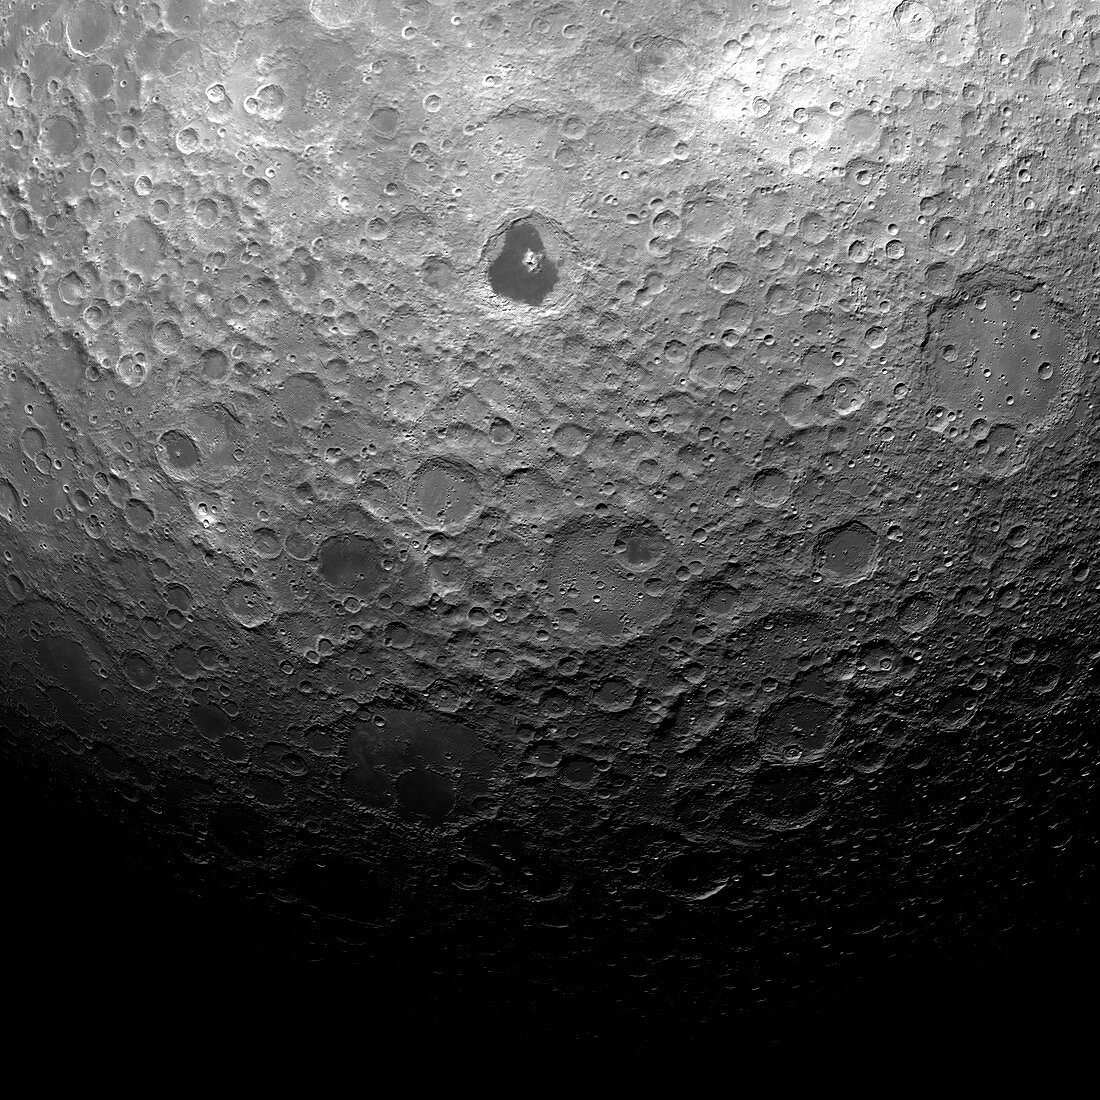 Far side of the Moon,optical image